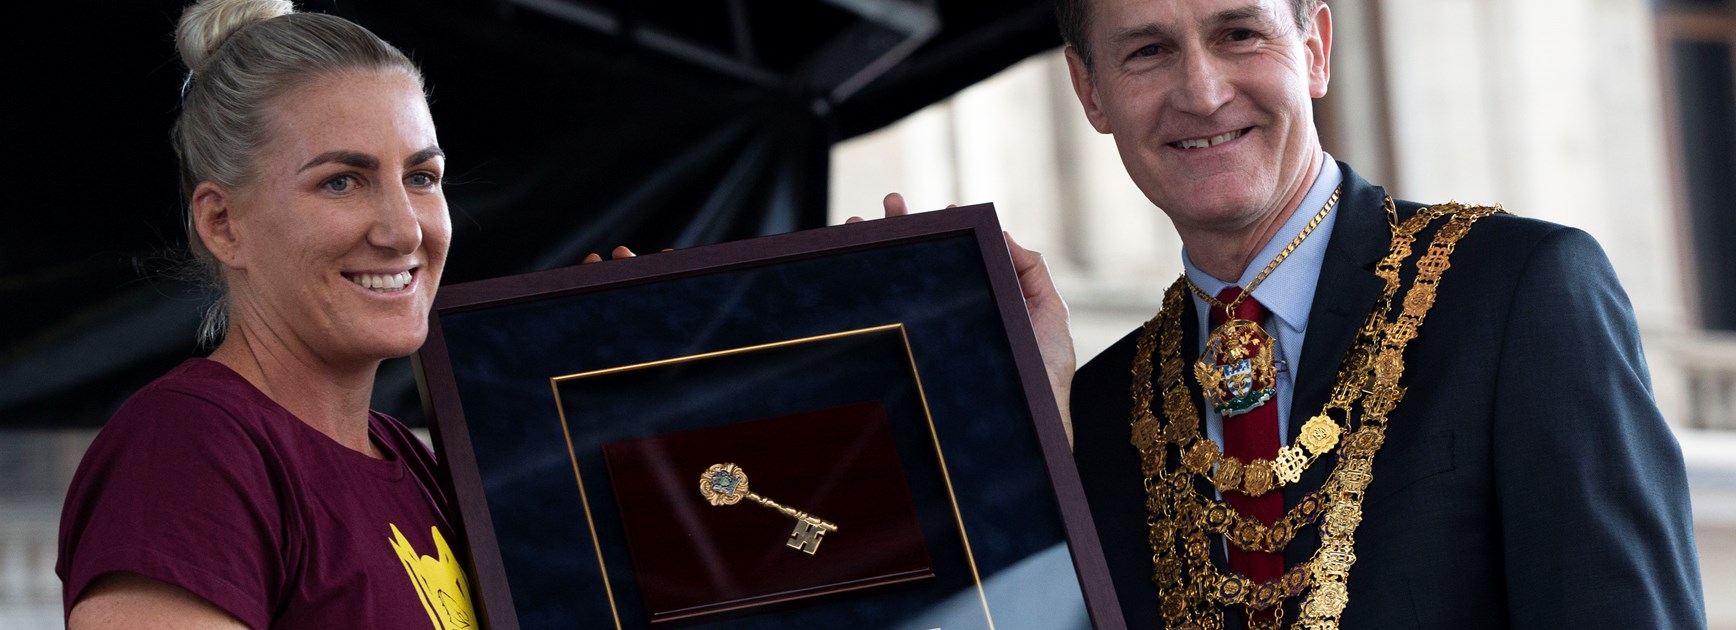 Broncos captain Ali Brigginshaw is presented with the keys to the city by Lord Mayor of Brisbane Graham Quirk.